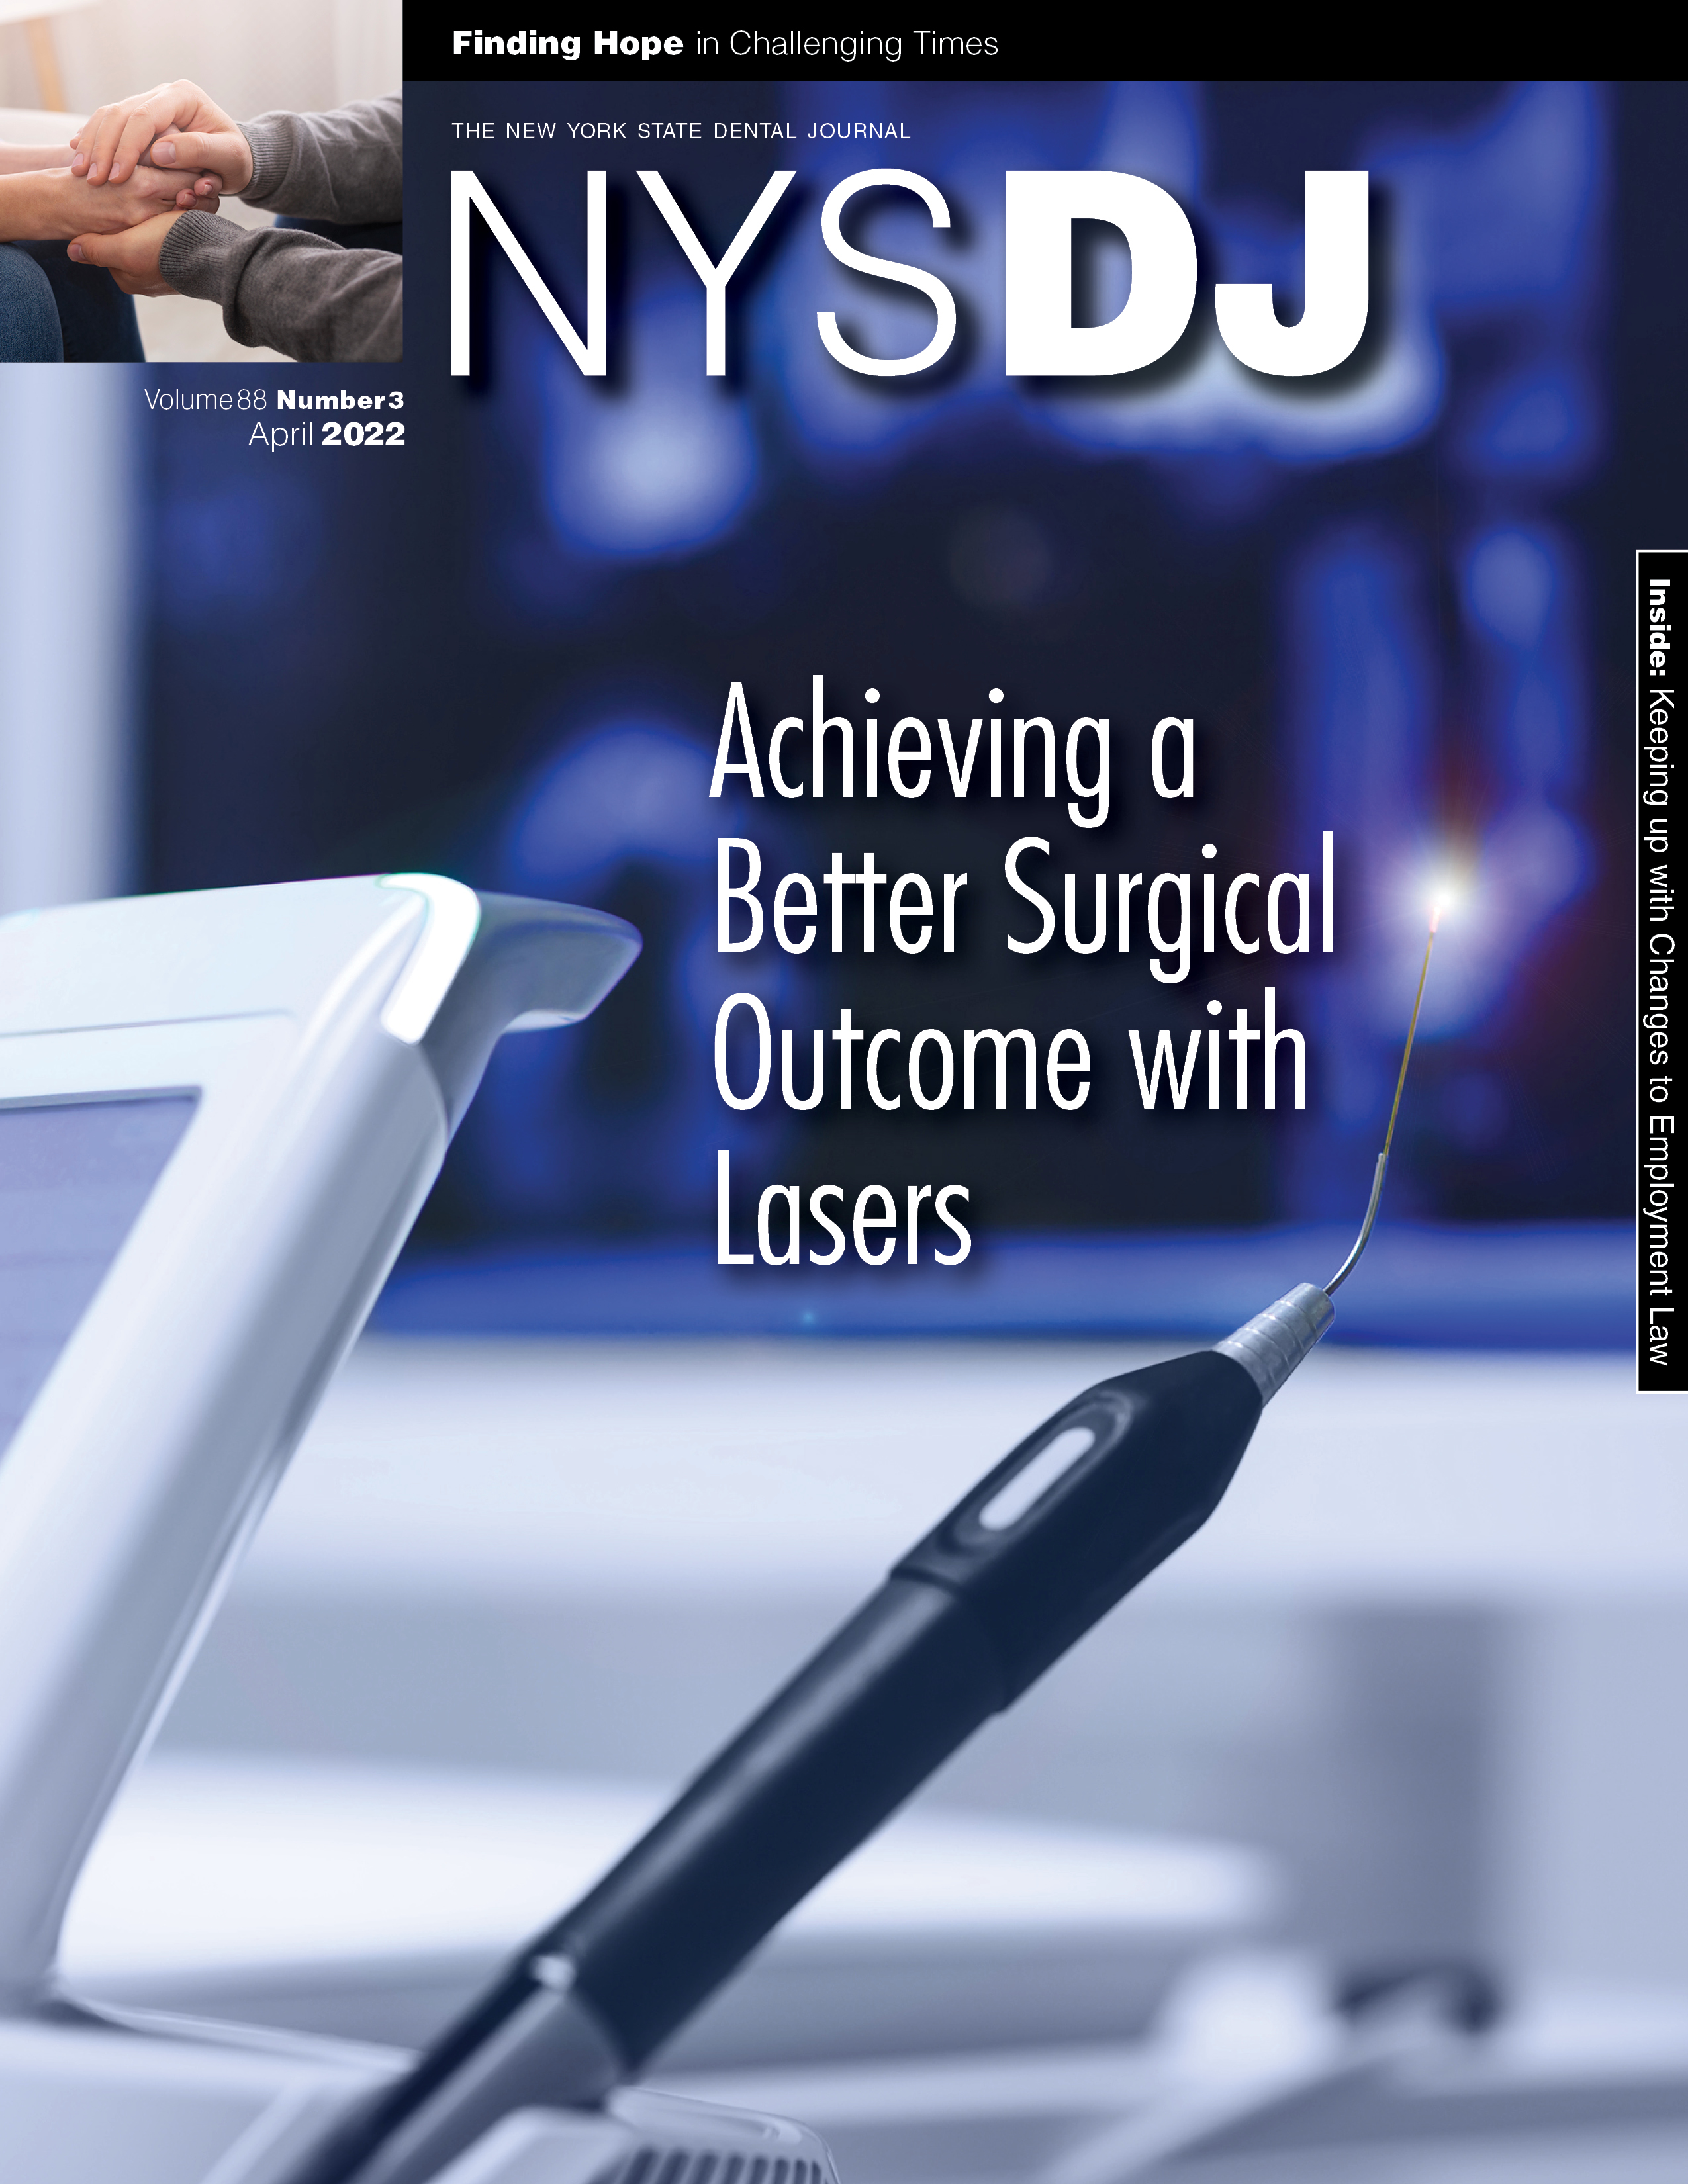 Cover of the NYSDJ with a photo of a handheld laser in a dental office.